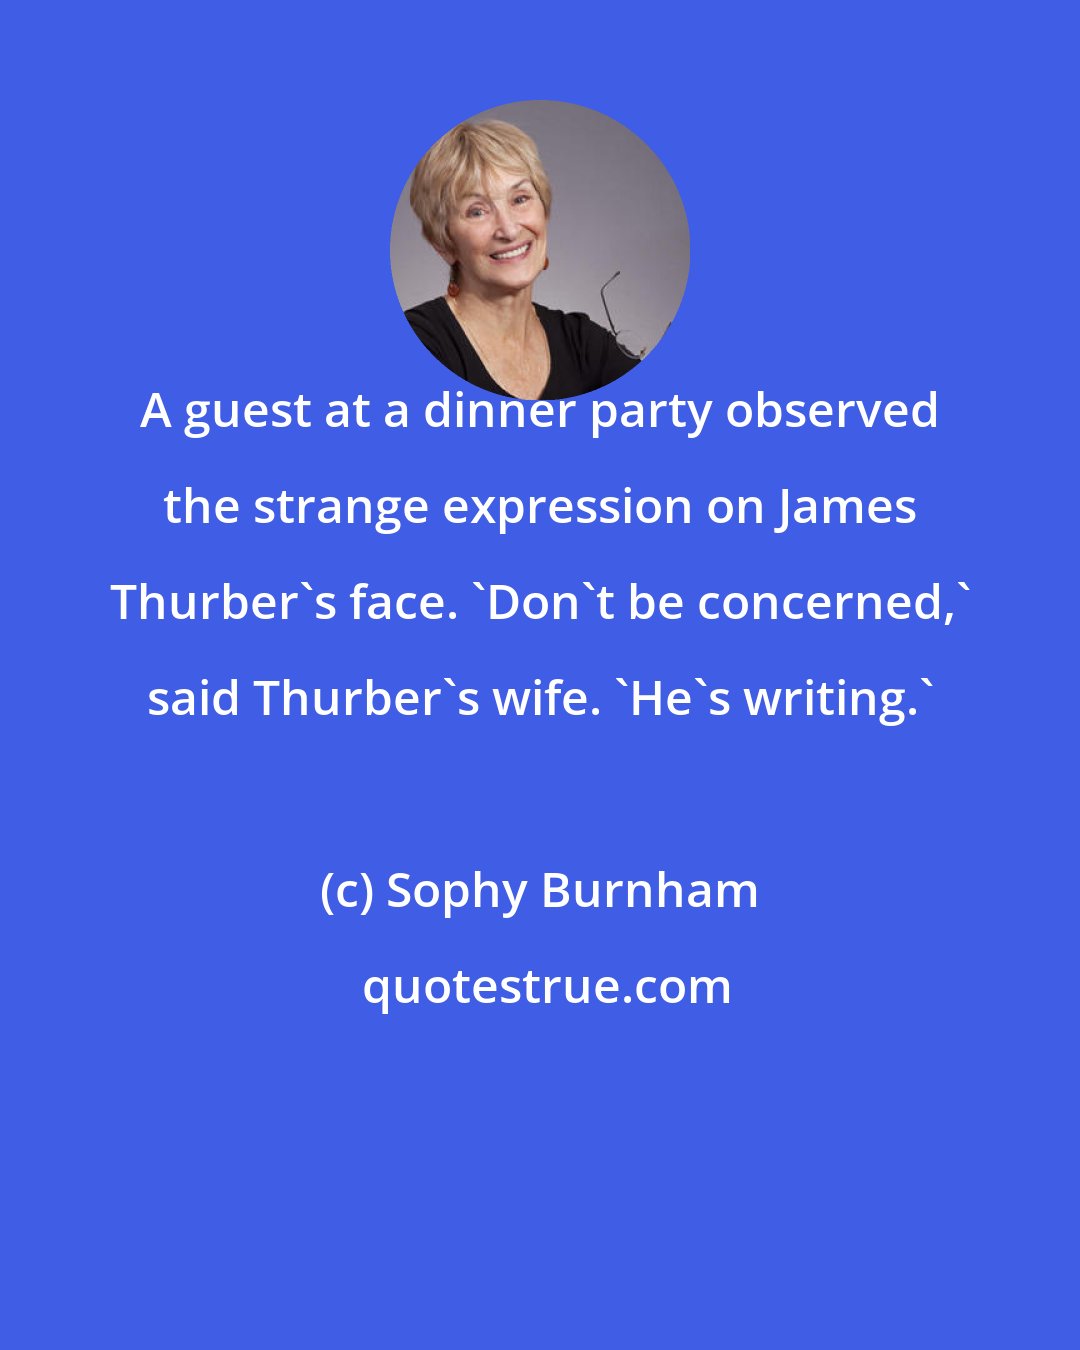 Sophy Burnham: A guest at a dinner party observed the strange expression on James Thurber's face. 'Don't be concerned,' said Thurber's wife. 'He's writing.'